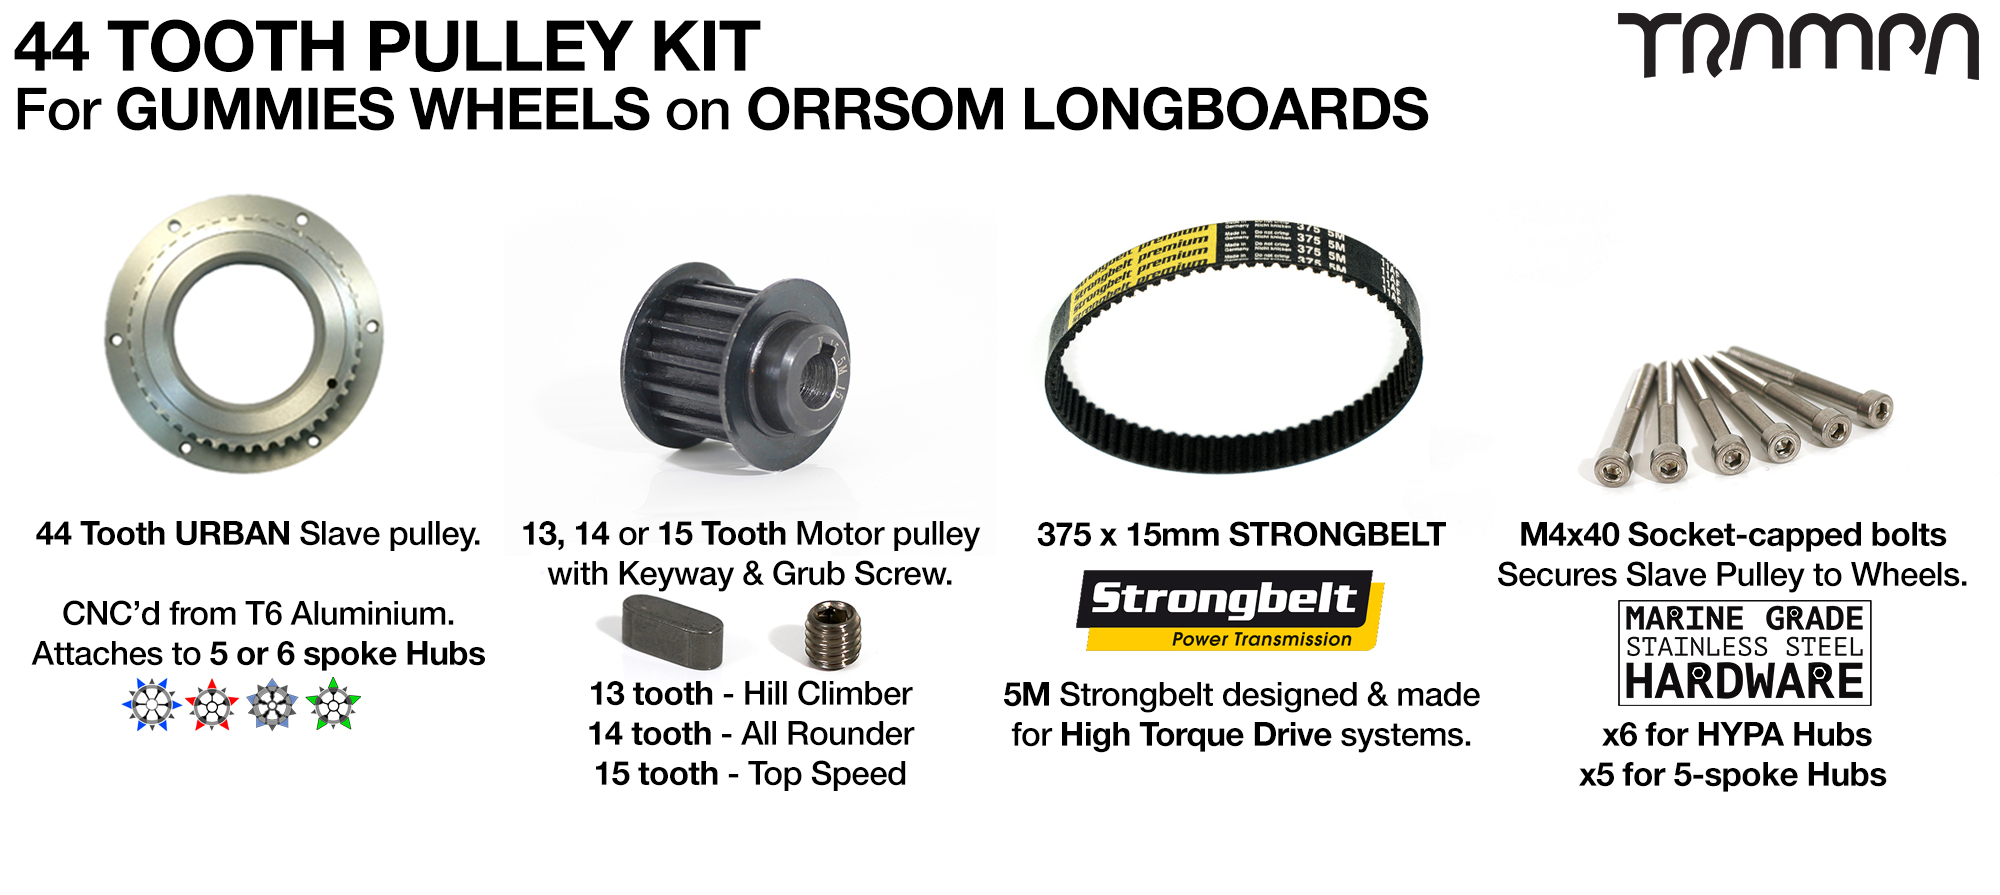 ORRSOM Longboard Pulley kit with 44 Tooth Slave & 375mm x 15mm Belt to fit 5 Inch GUMMIES Tyres